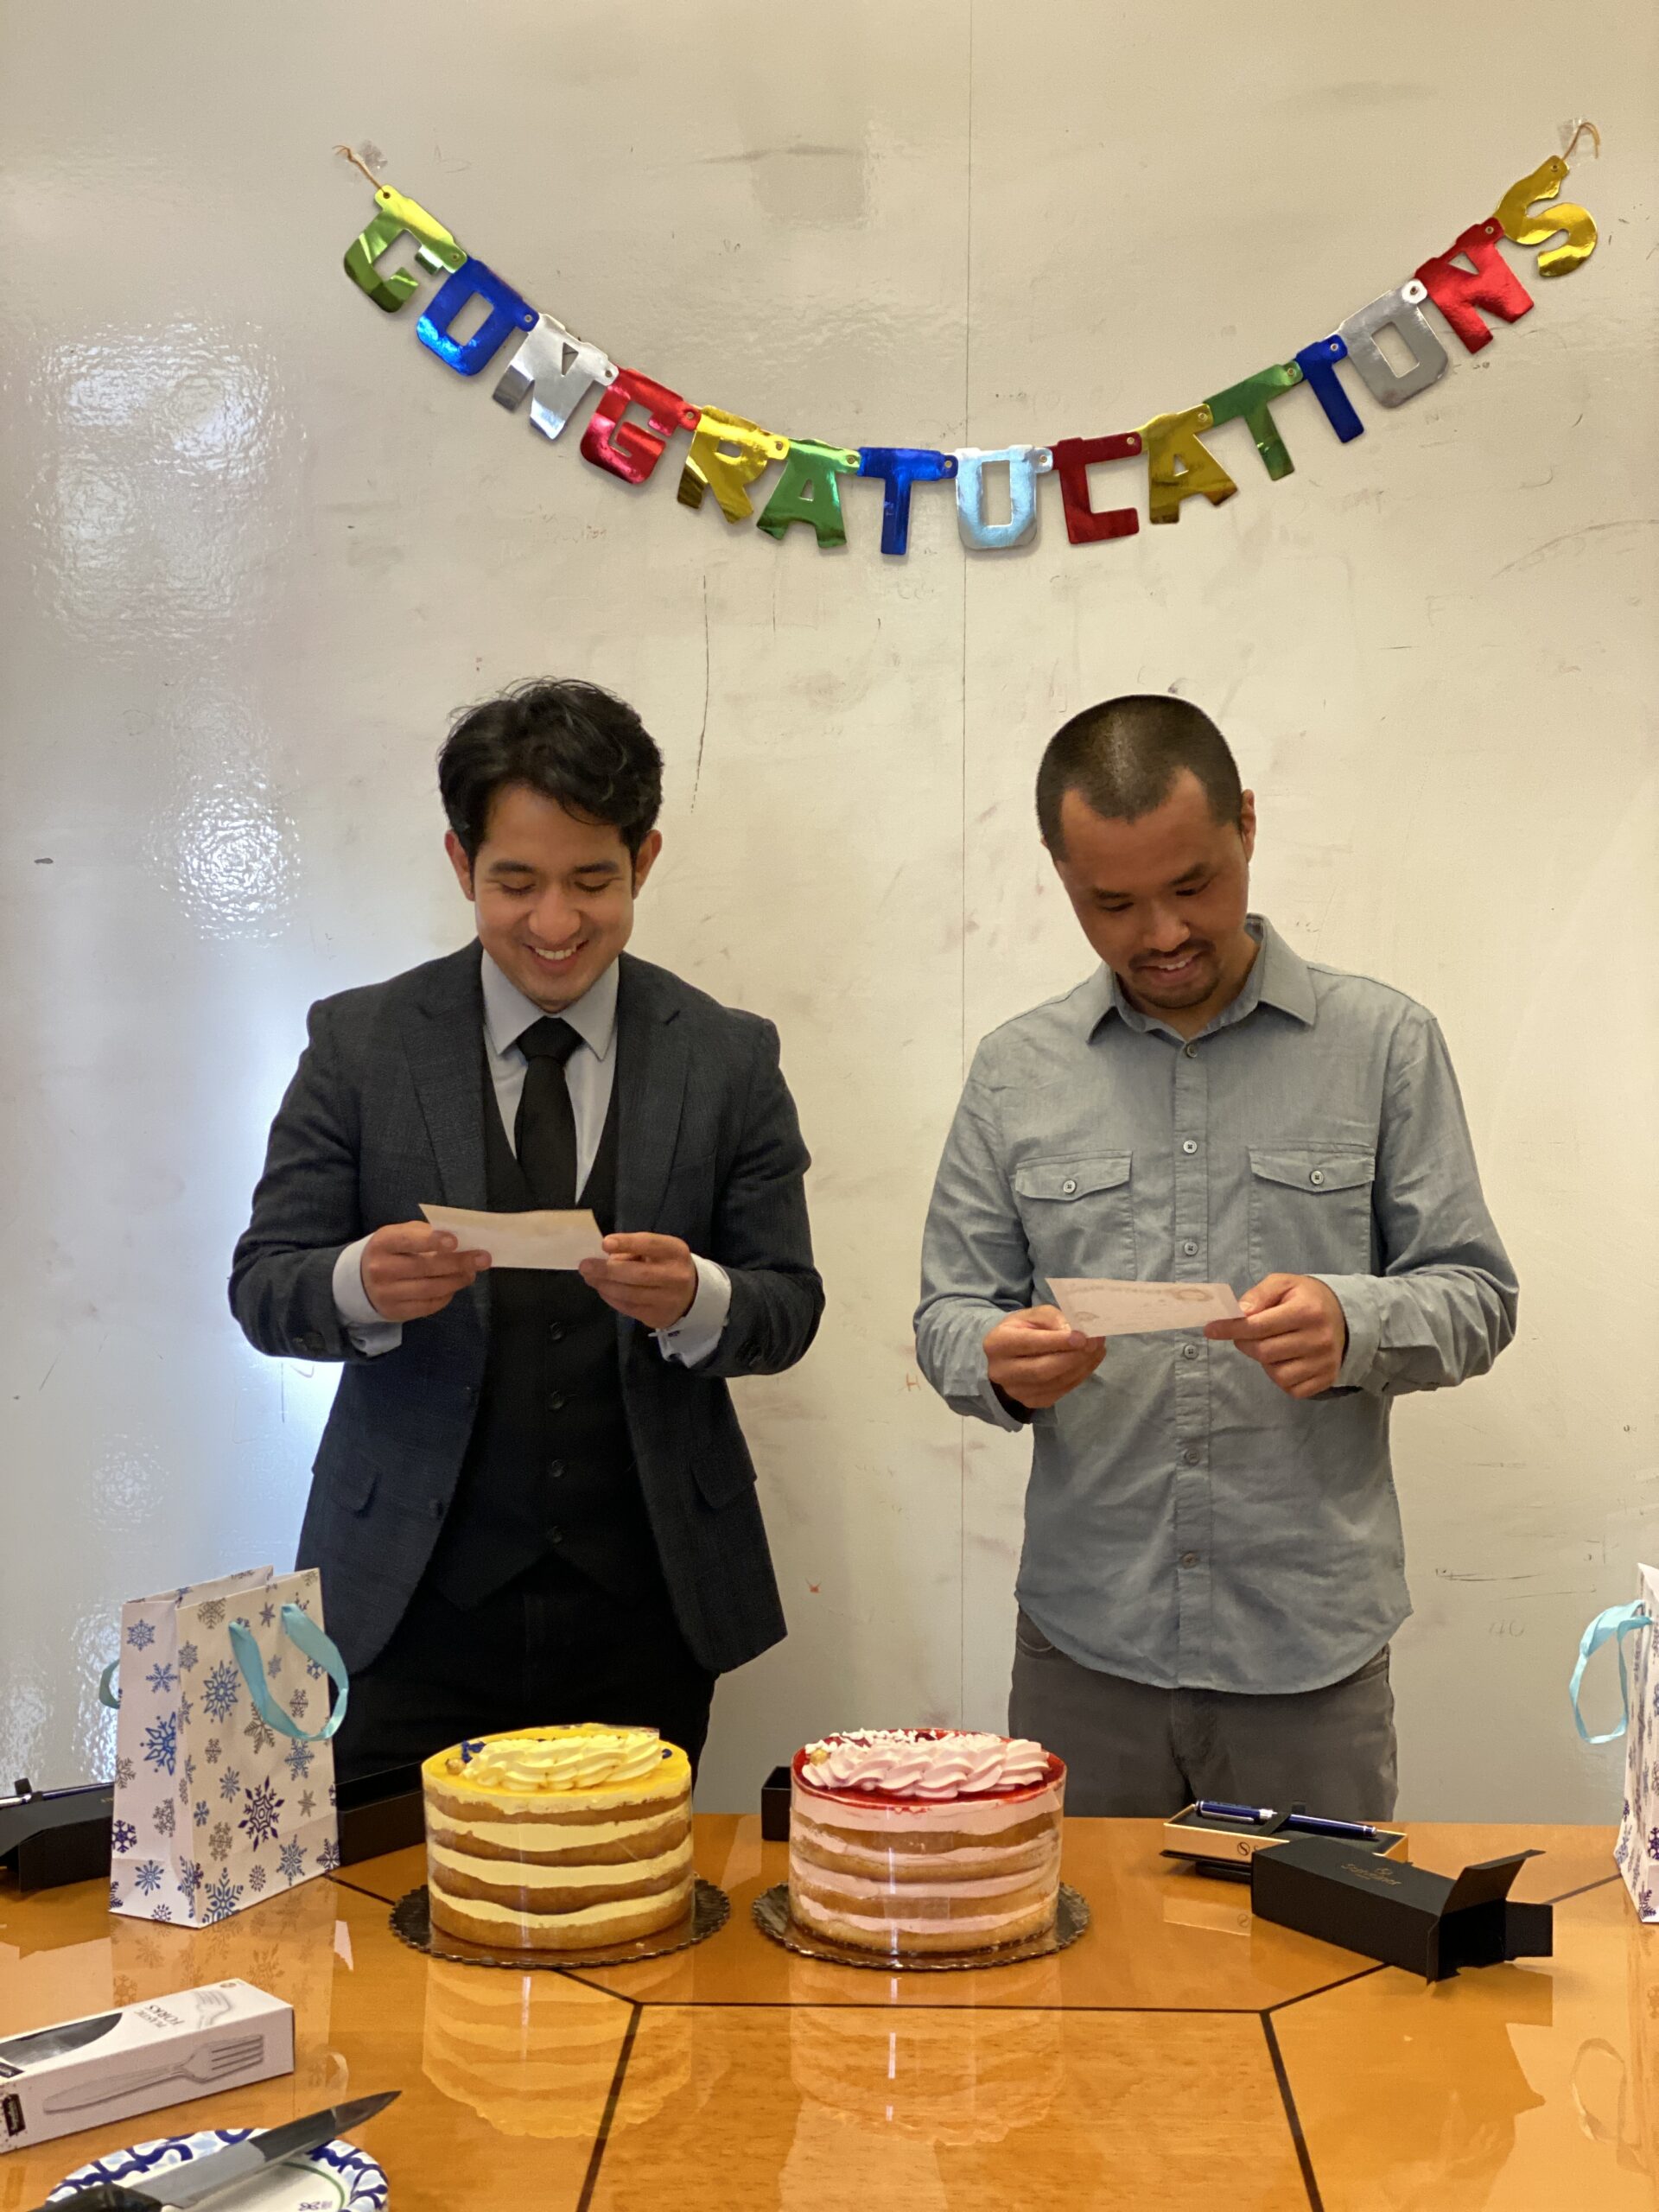 We marked Andre and Atsushi’s achievements with a celebration.